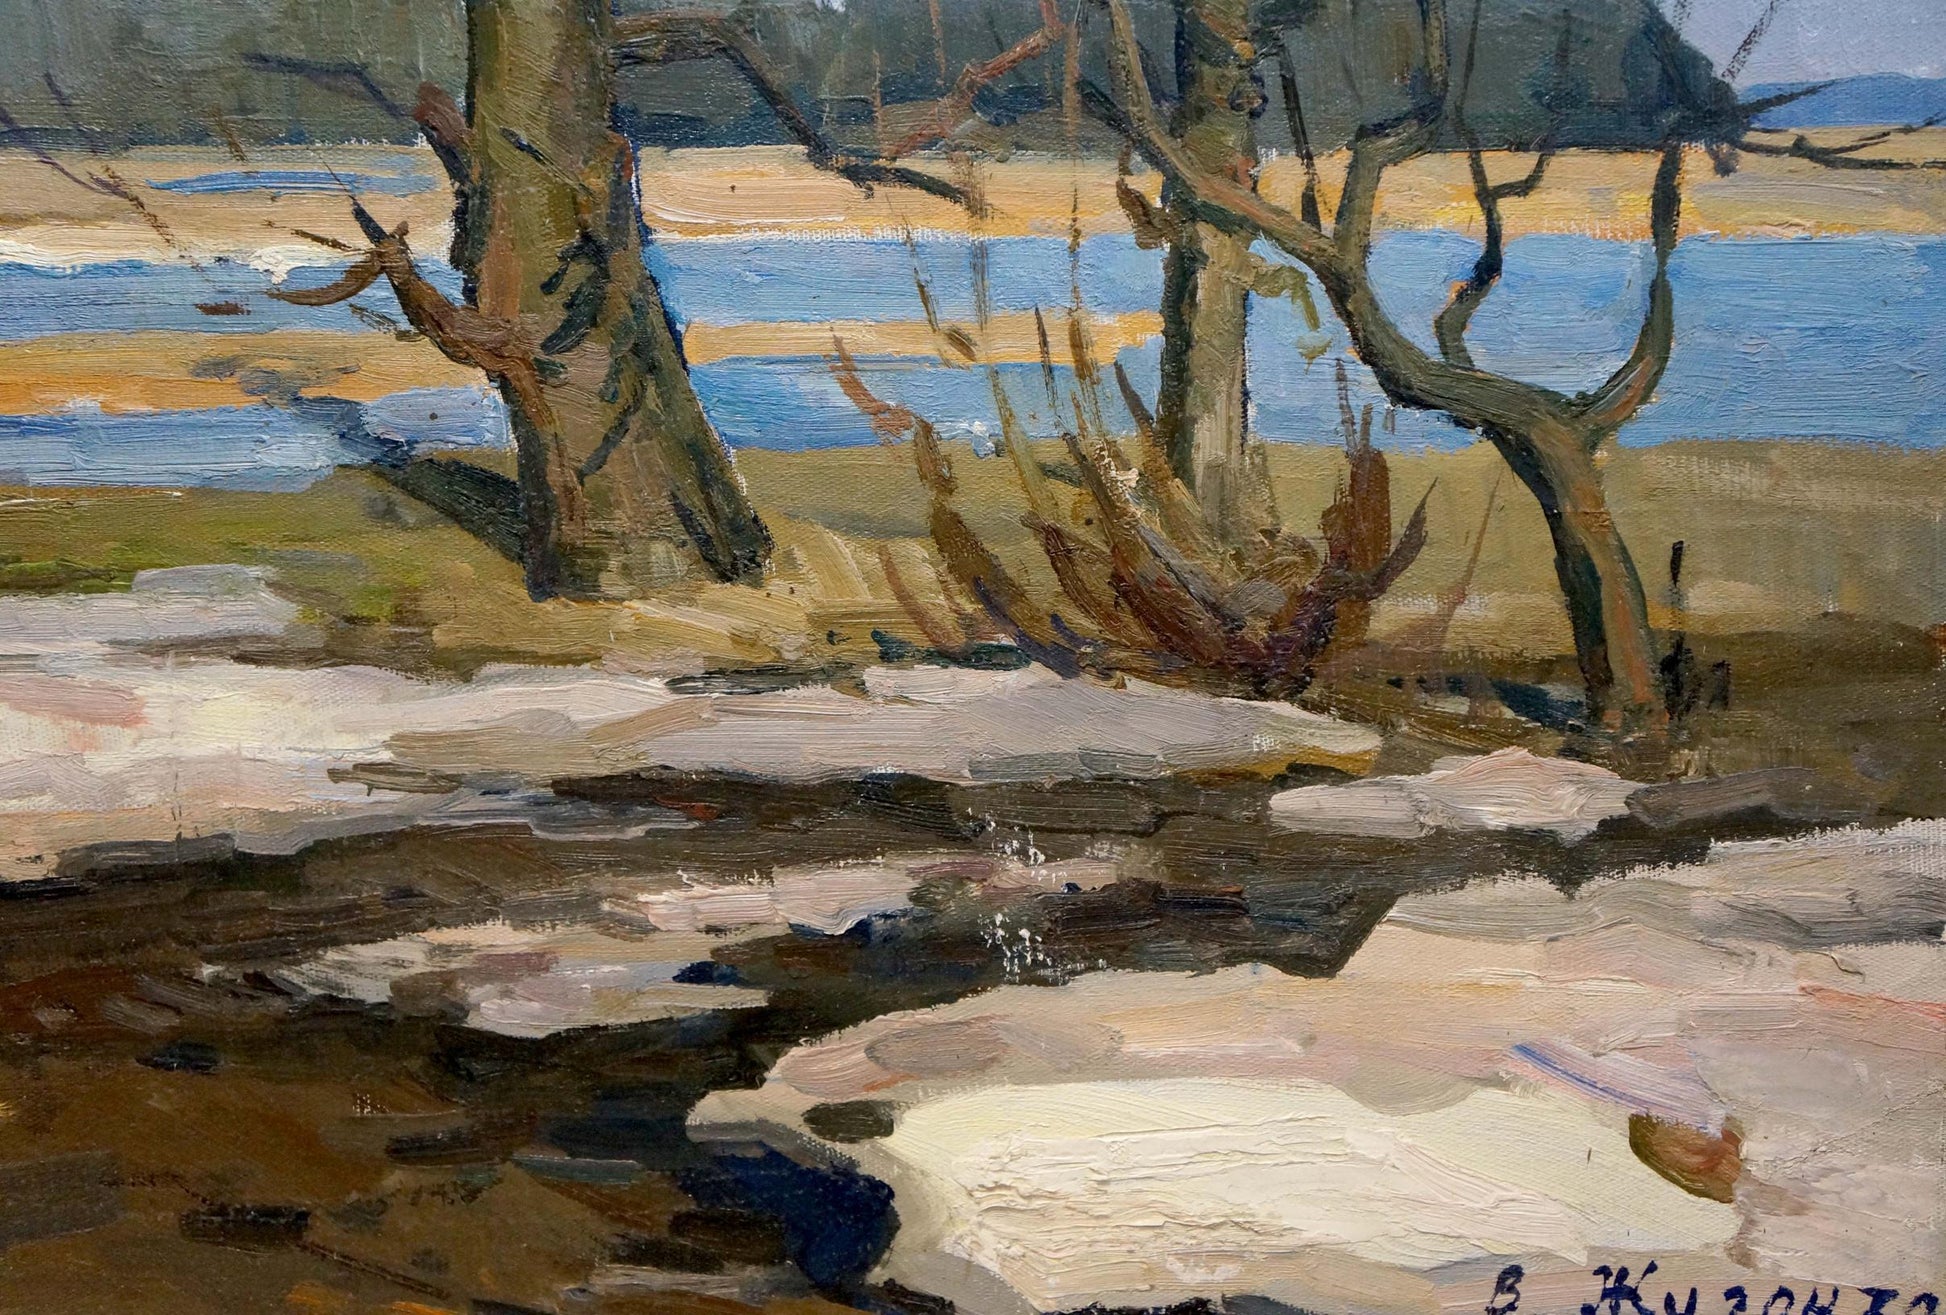 Vladimir Alexandrovich Zhugan's portrayal of the transition from winter in oil